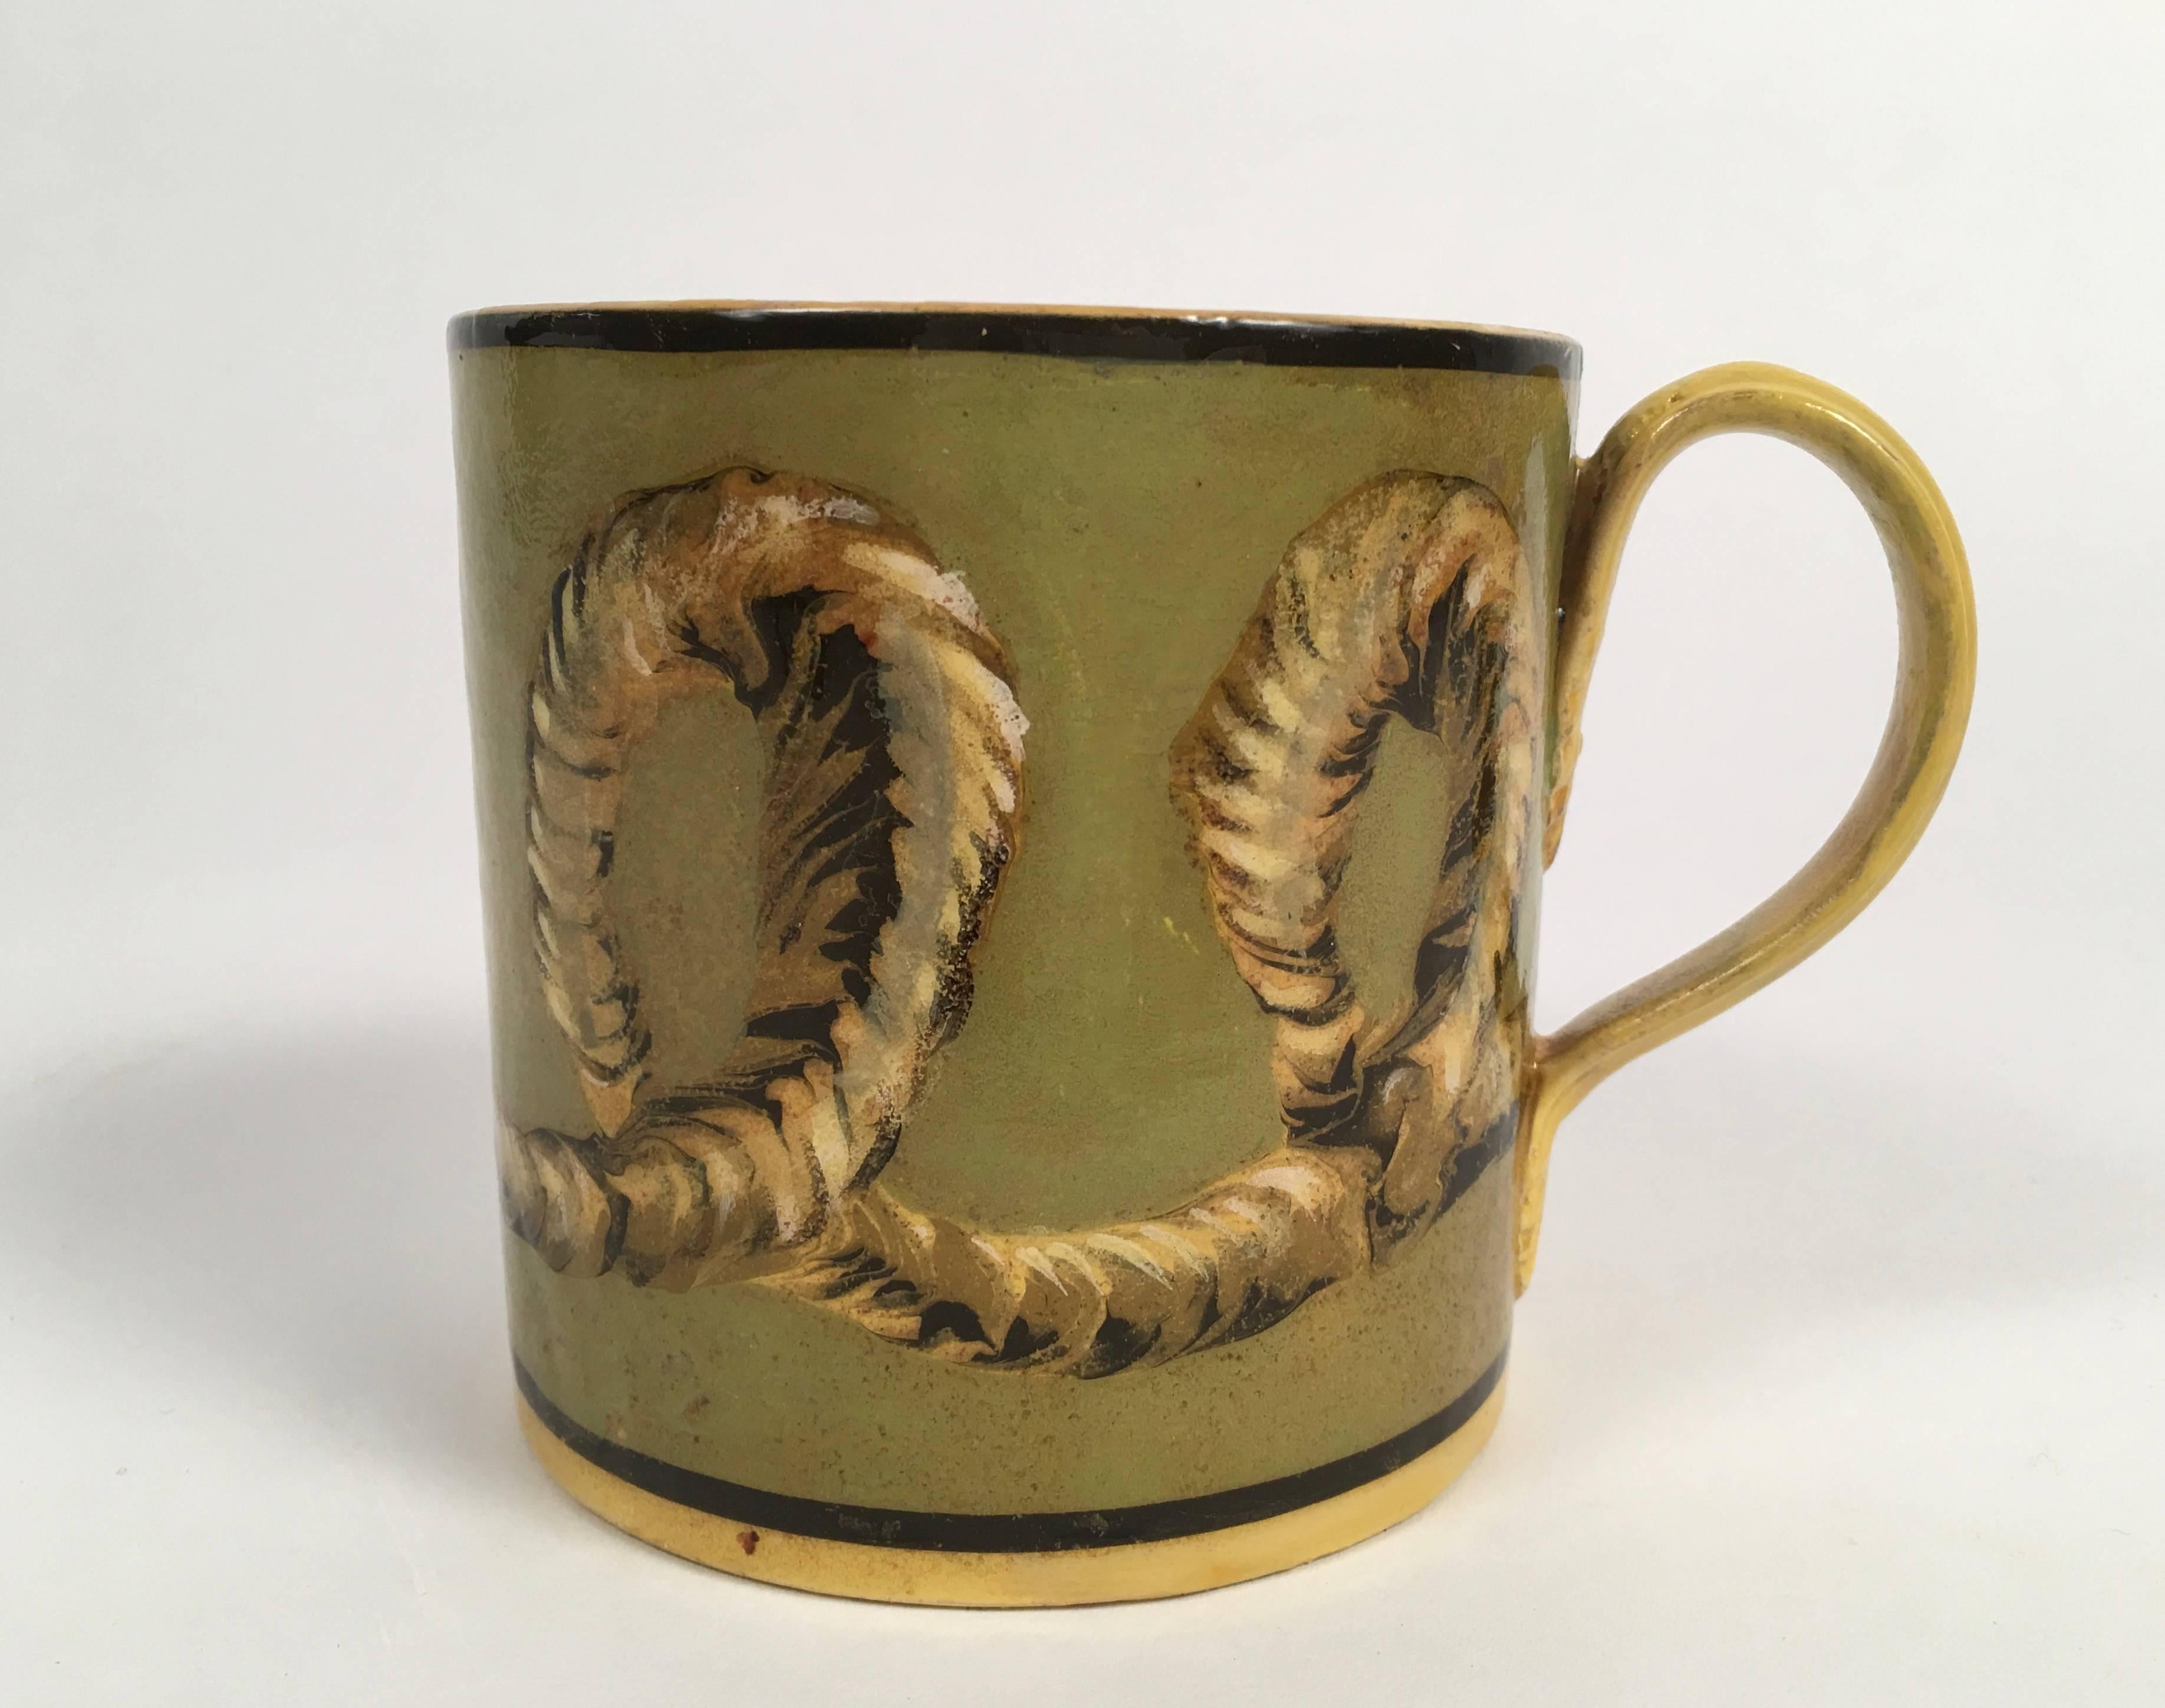 A French mochaware pottery mug in yellow with three dimensional looking rope twist decoration, or décor de cordages, in yellow, brown and white on a sage green ground with applied strap handle by Creil, circa 1830. Generously proportioned with